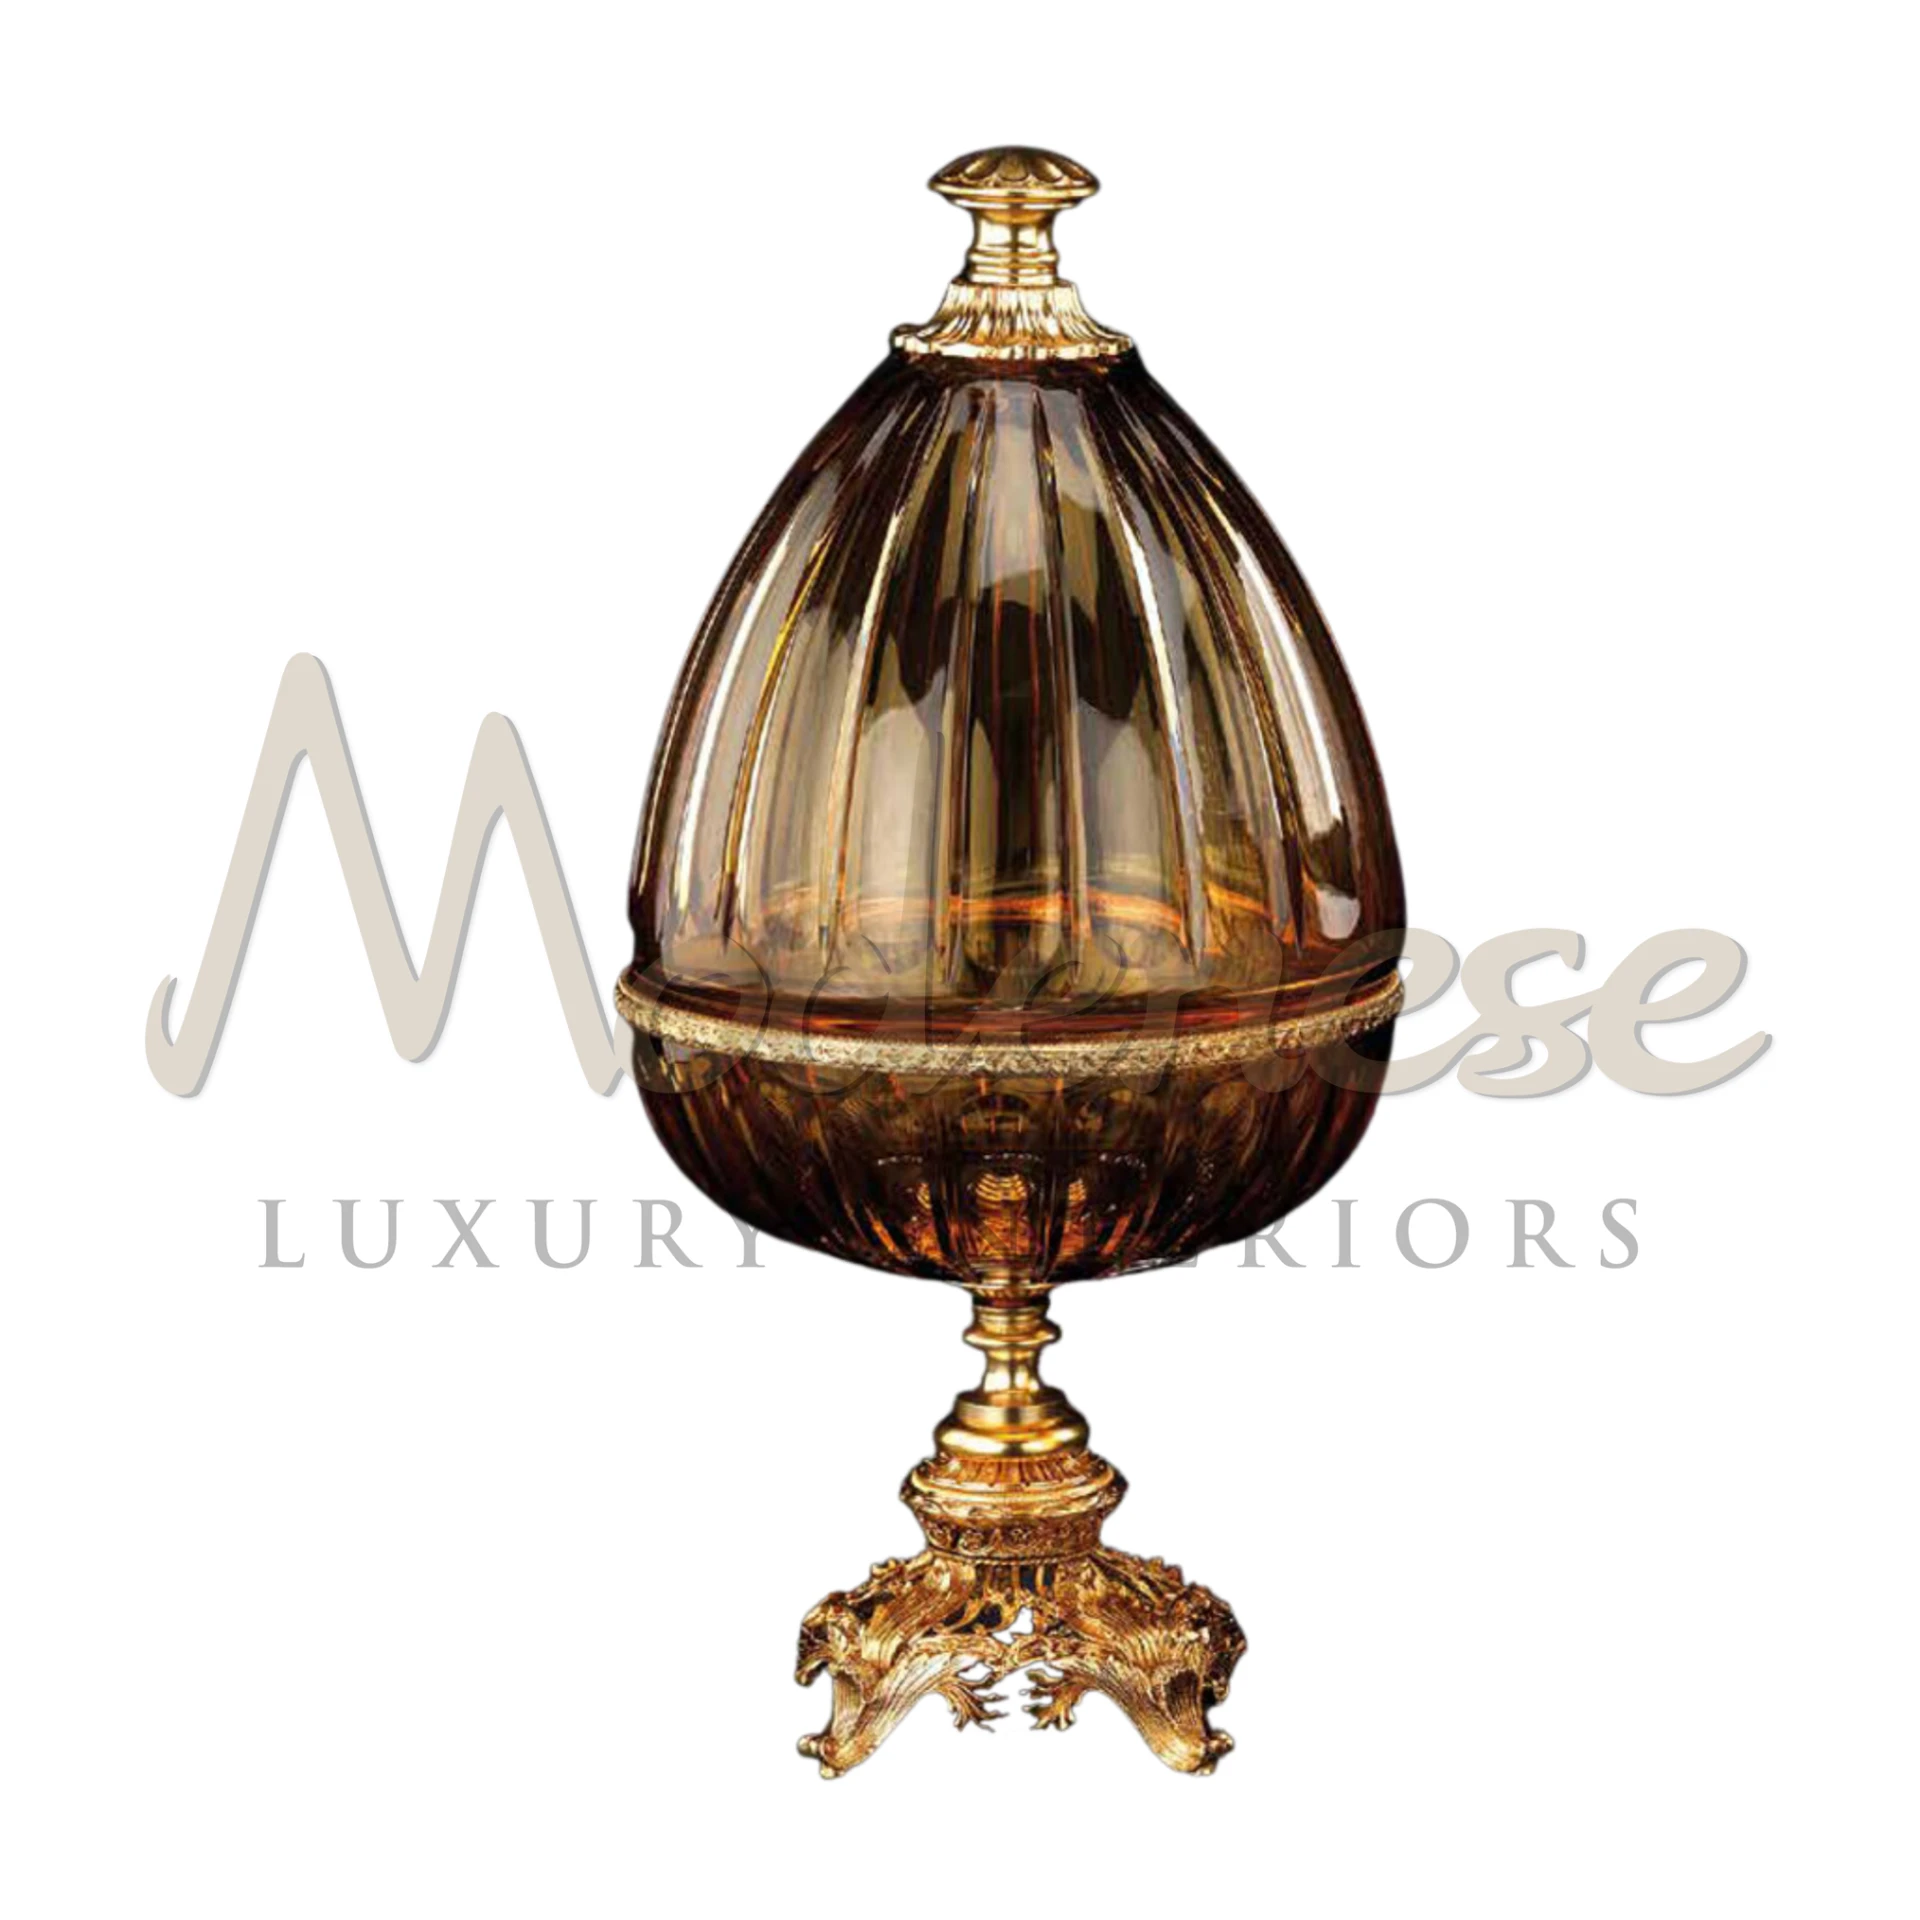 High-quality luxury crystal vase, perfect for elegant and sophisticated interior design, blending classic and baroque styles.